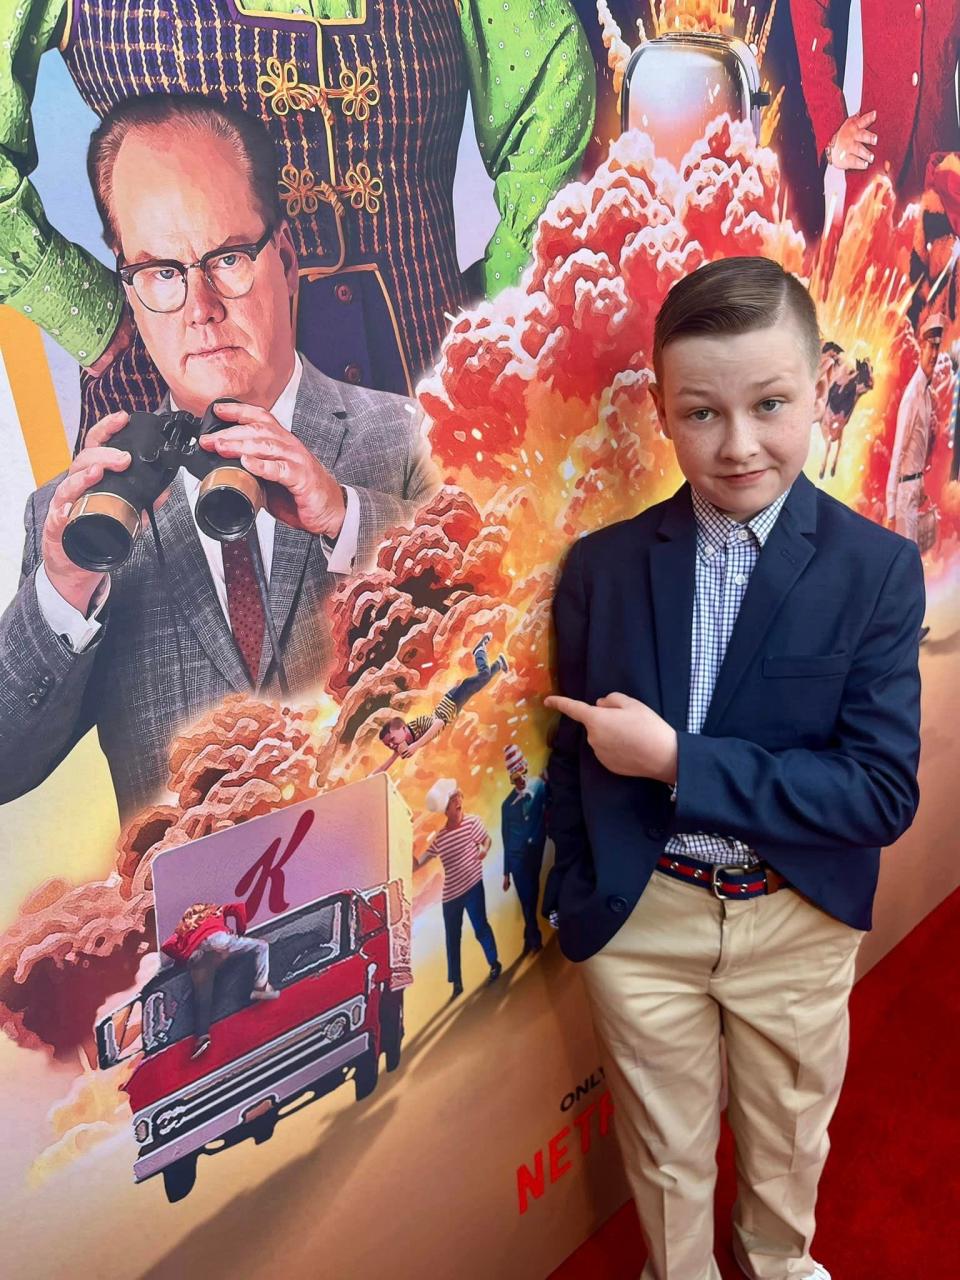 In Hollywood, actor Bailey Sheetz of Chester, Virginia at the premiere of Jerry Seinfeld's movie "Unfrosted" points at his character Butchie flying through the air on the poster.